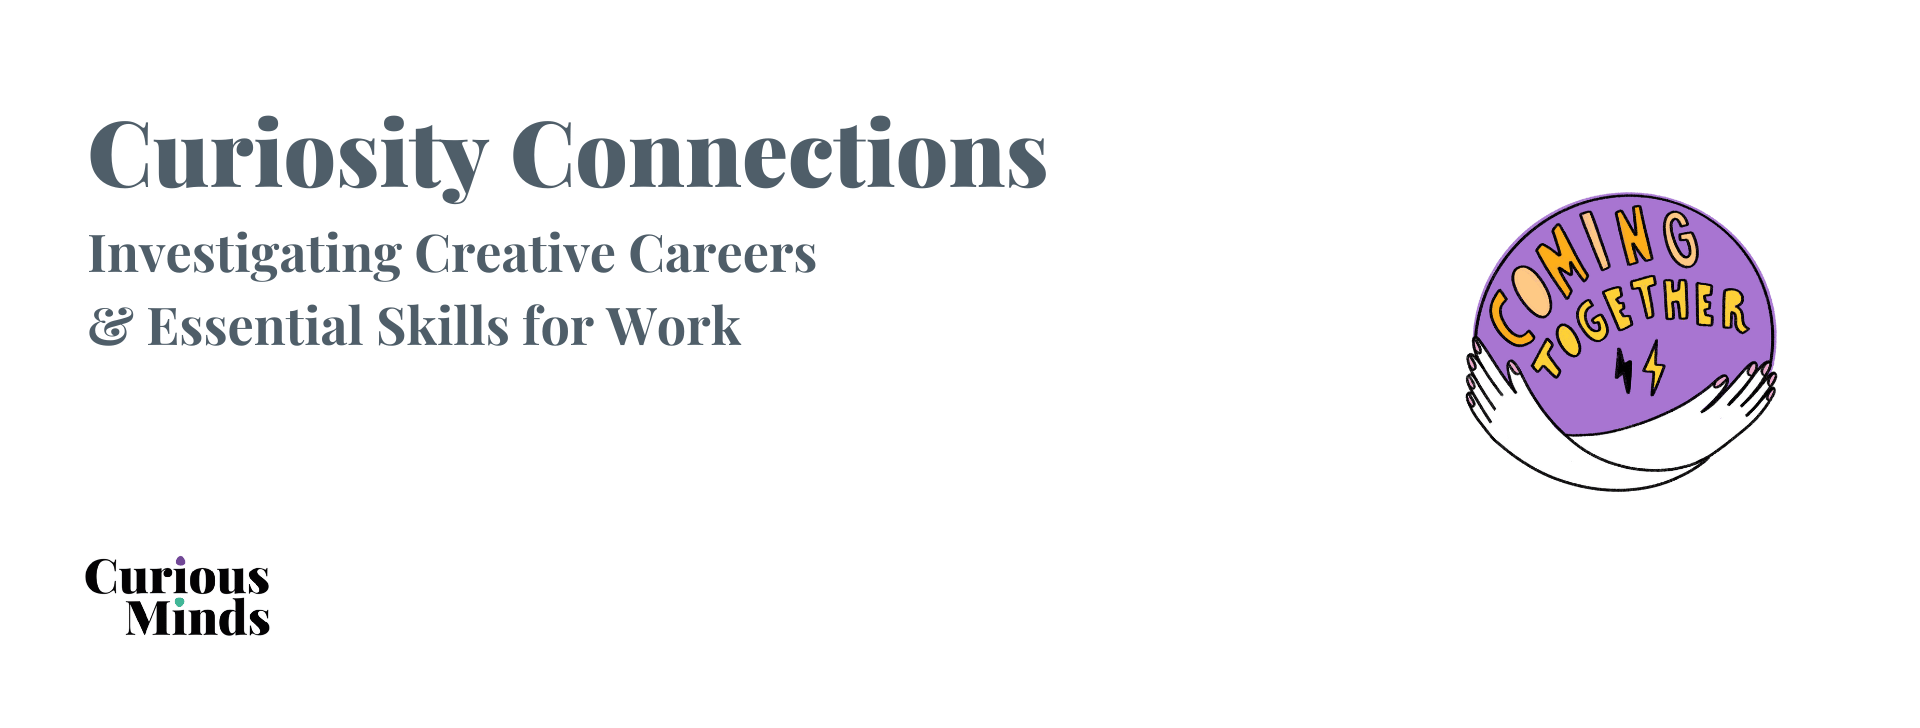 Web banner for Curiosity Connections - Creative Careers and Essential Skills for Work